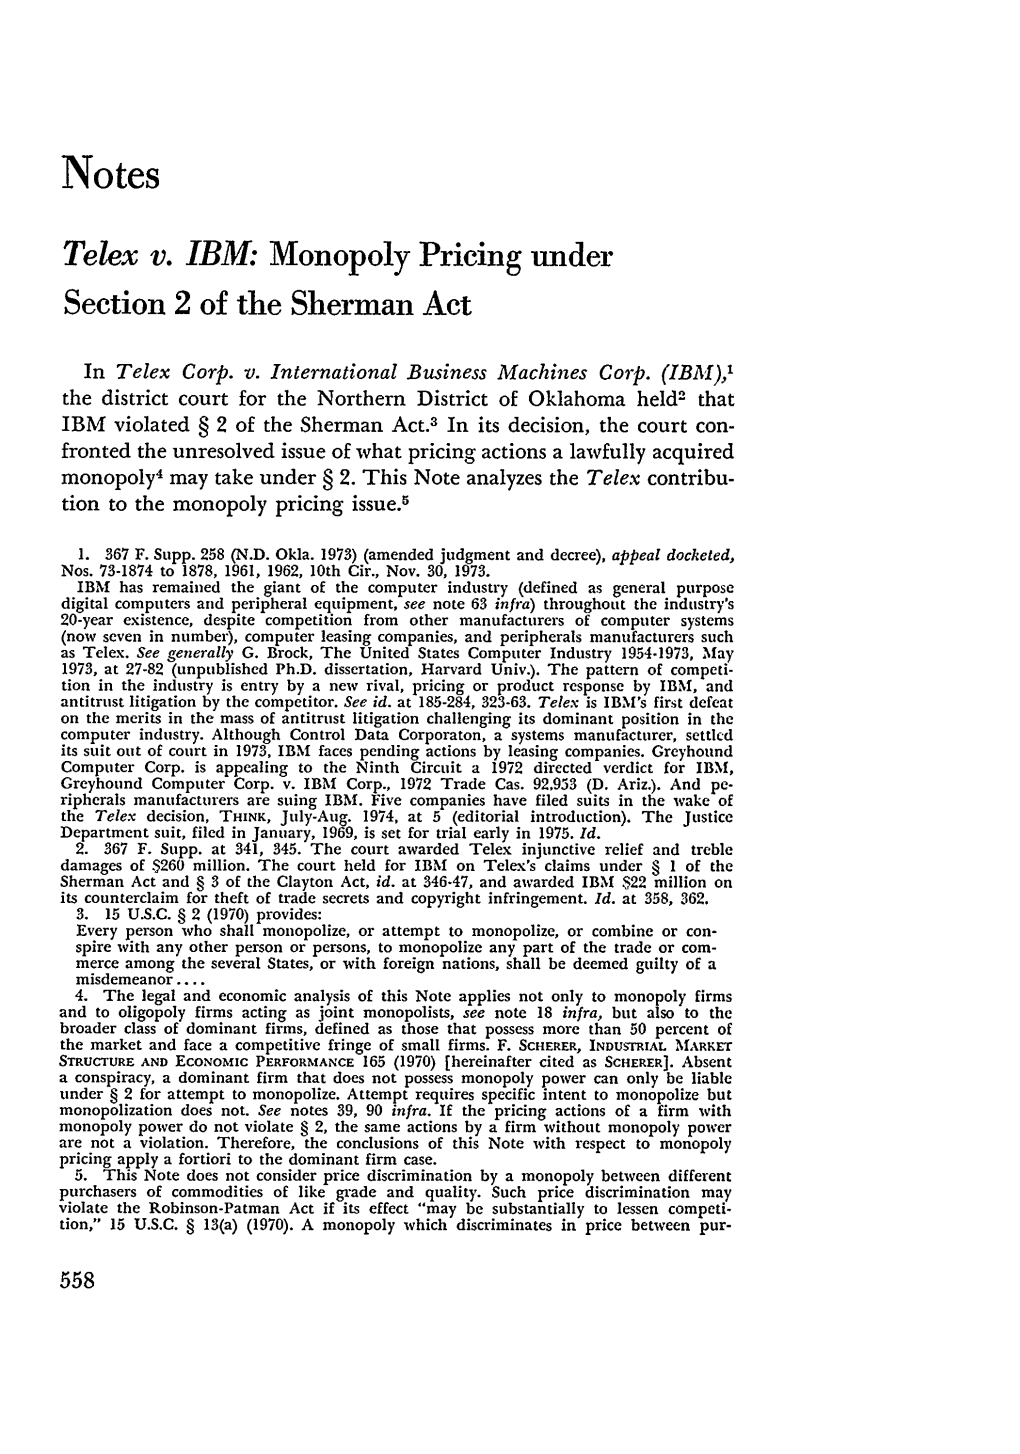 Telex V. IBM: Monopoly Pricing Under Section 2 of the Sherman Act